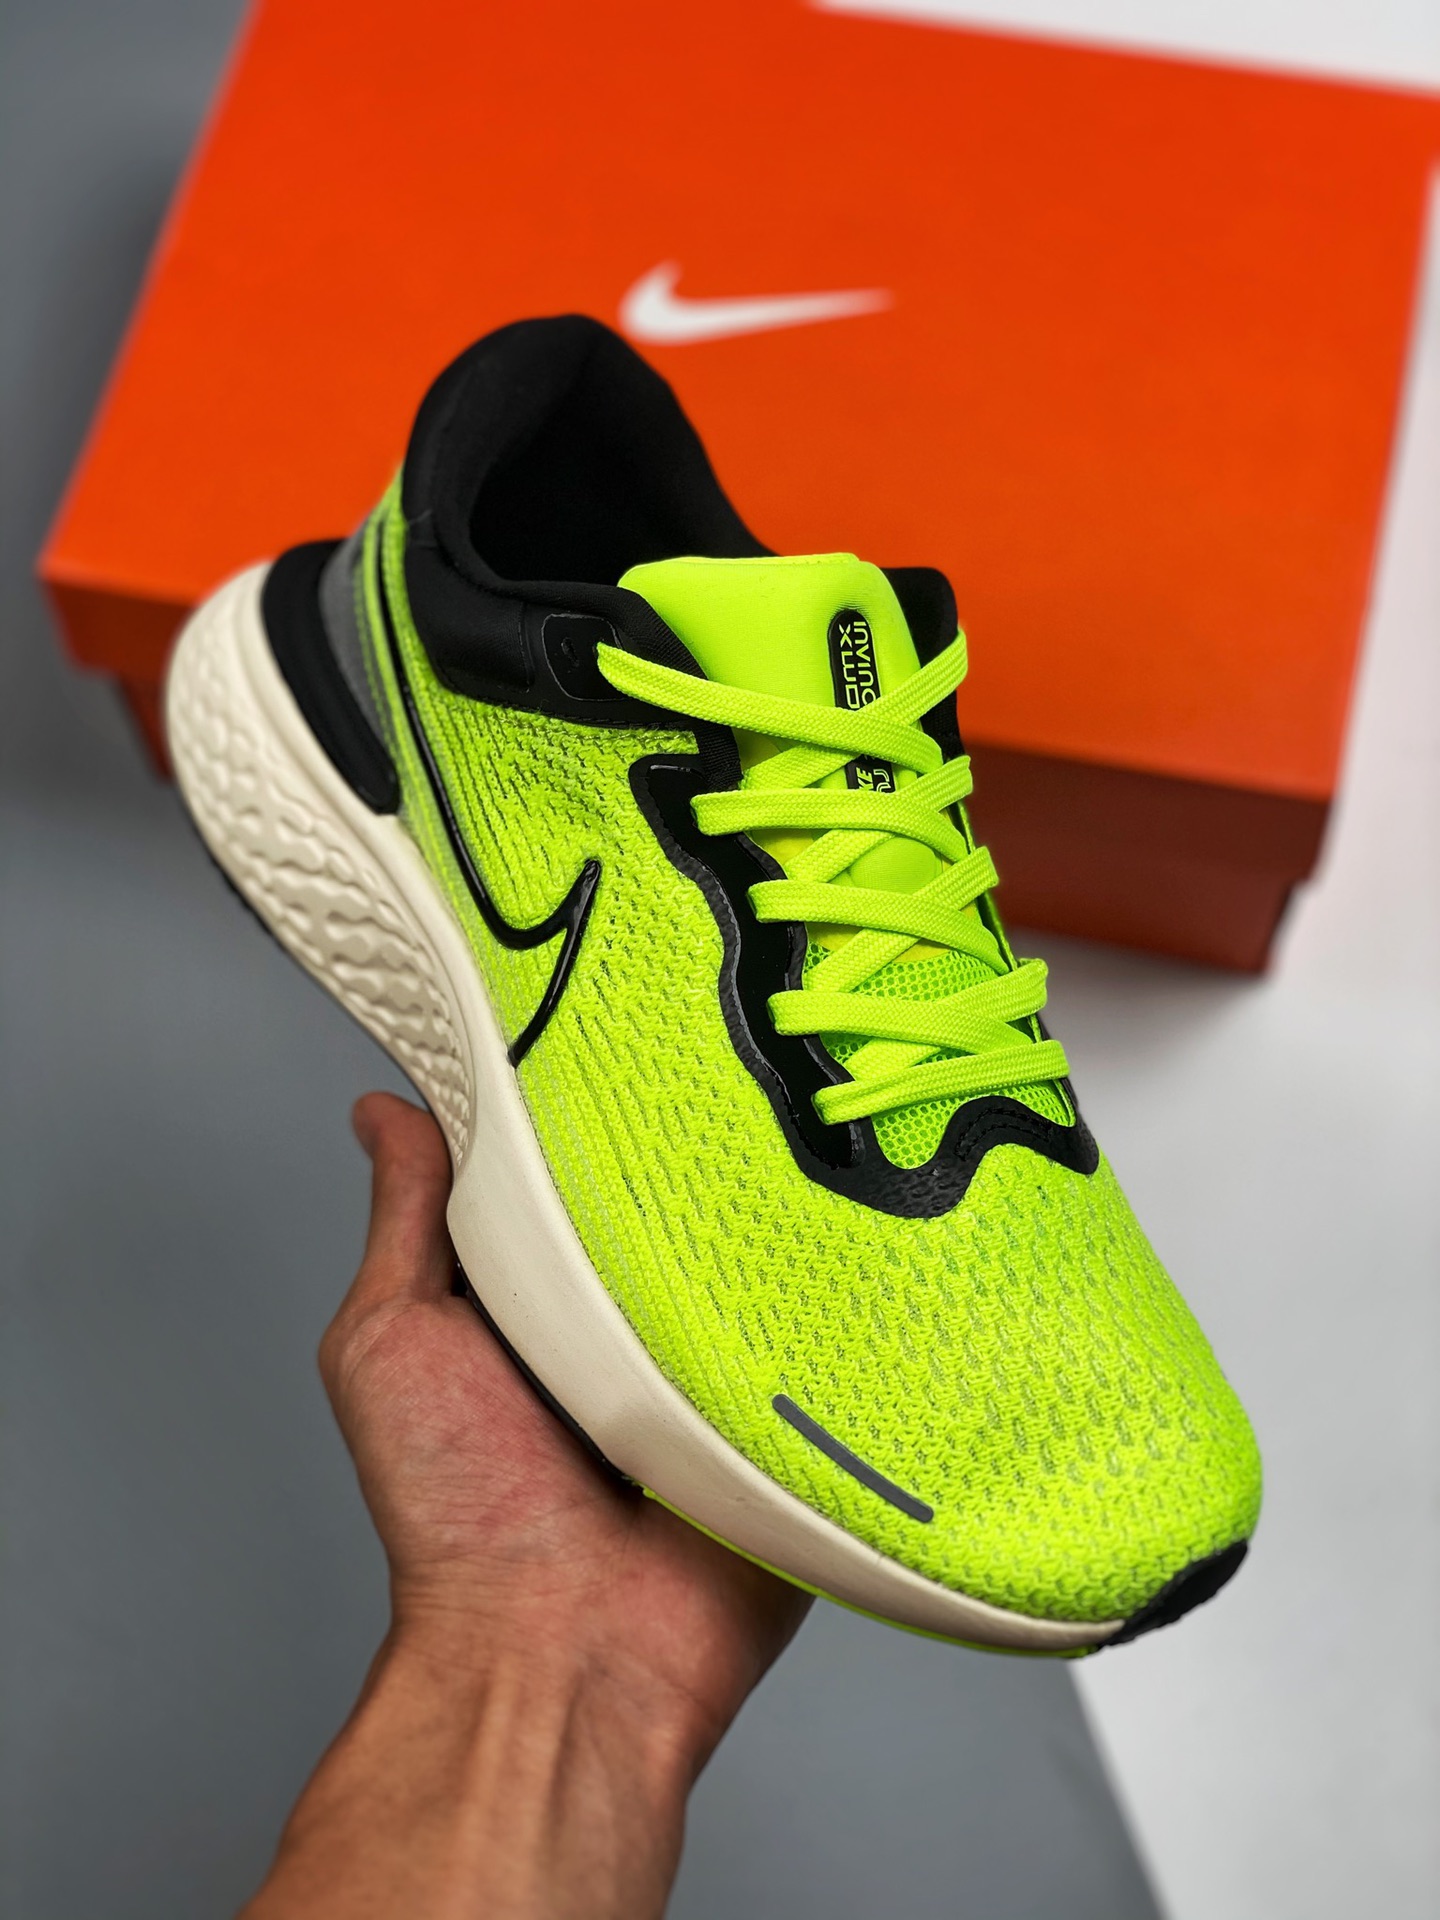 Nike ZoomX Invincible Run Flyknit Volt/Barely Volt/Black For Sale â Sneaker Hello